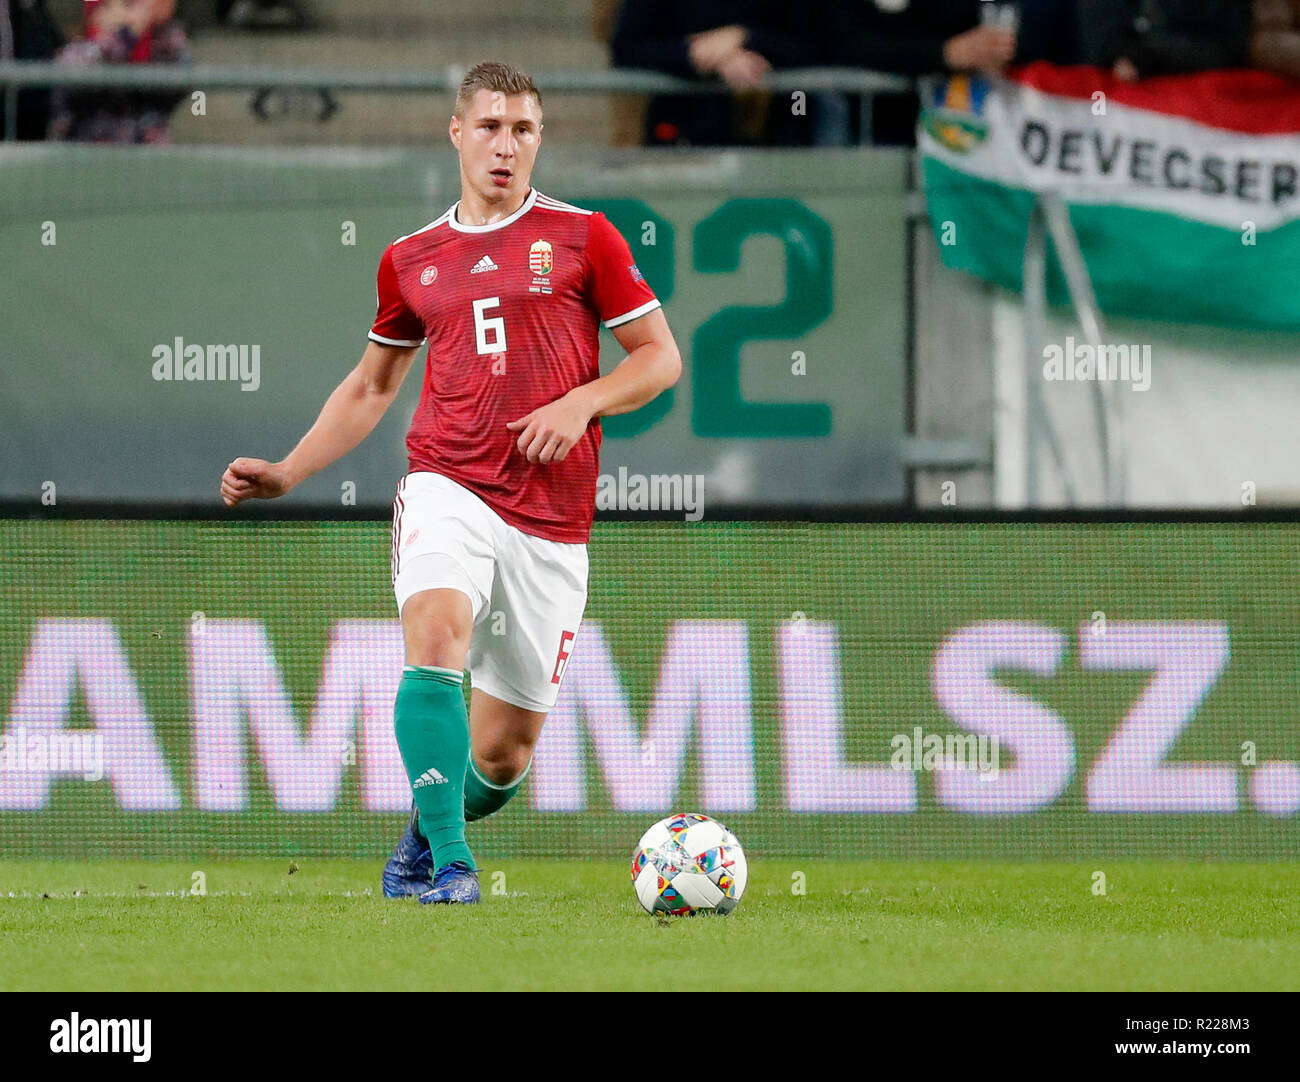 Budapest, Hungary. 15th November, 2018. Willi Orban of Hungary passes the ball during the UEFA Nations League group stage match between Hungary and Estonia at Groupama Arena on November 15, 2018 in Budapest, Hungary. Credit: Laszlo Szirtesi/Alamy Live News Stock Photo